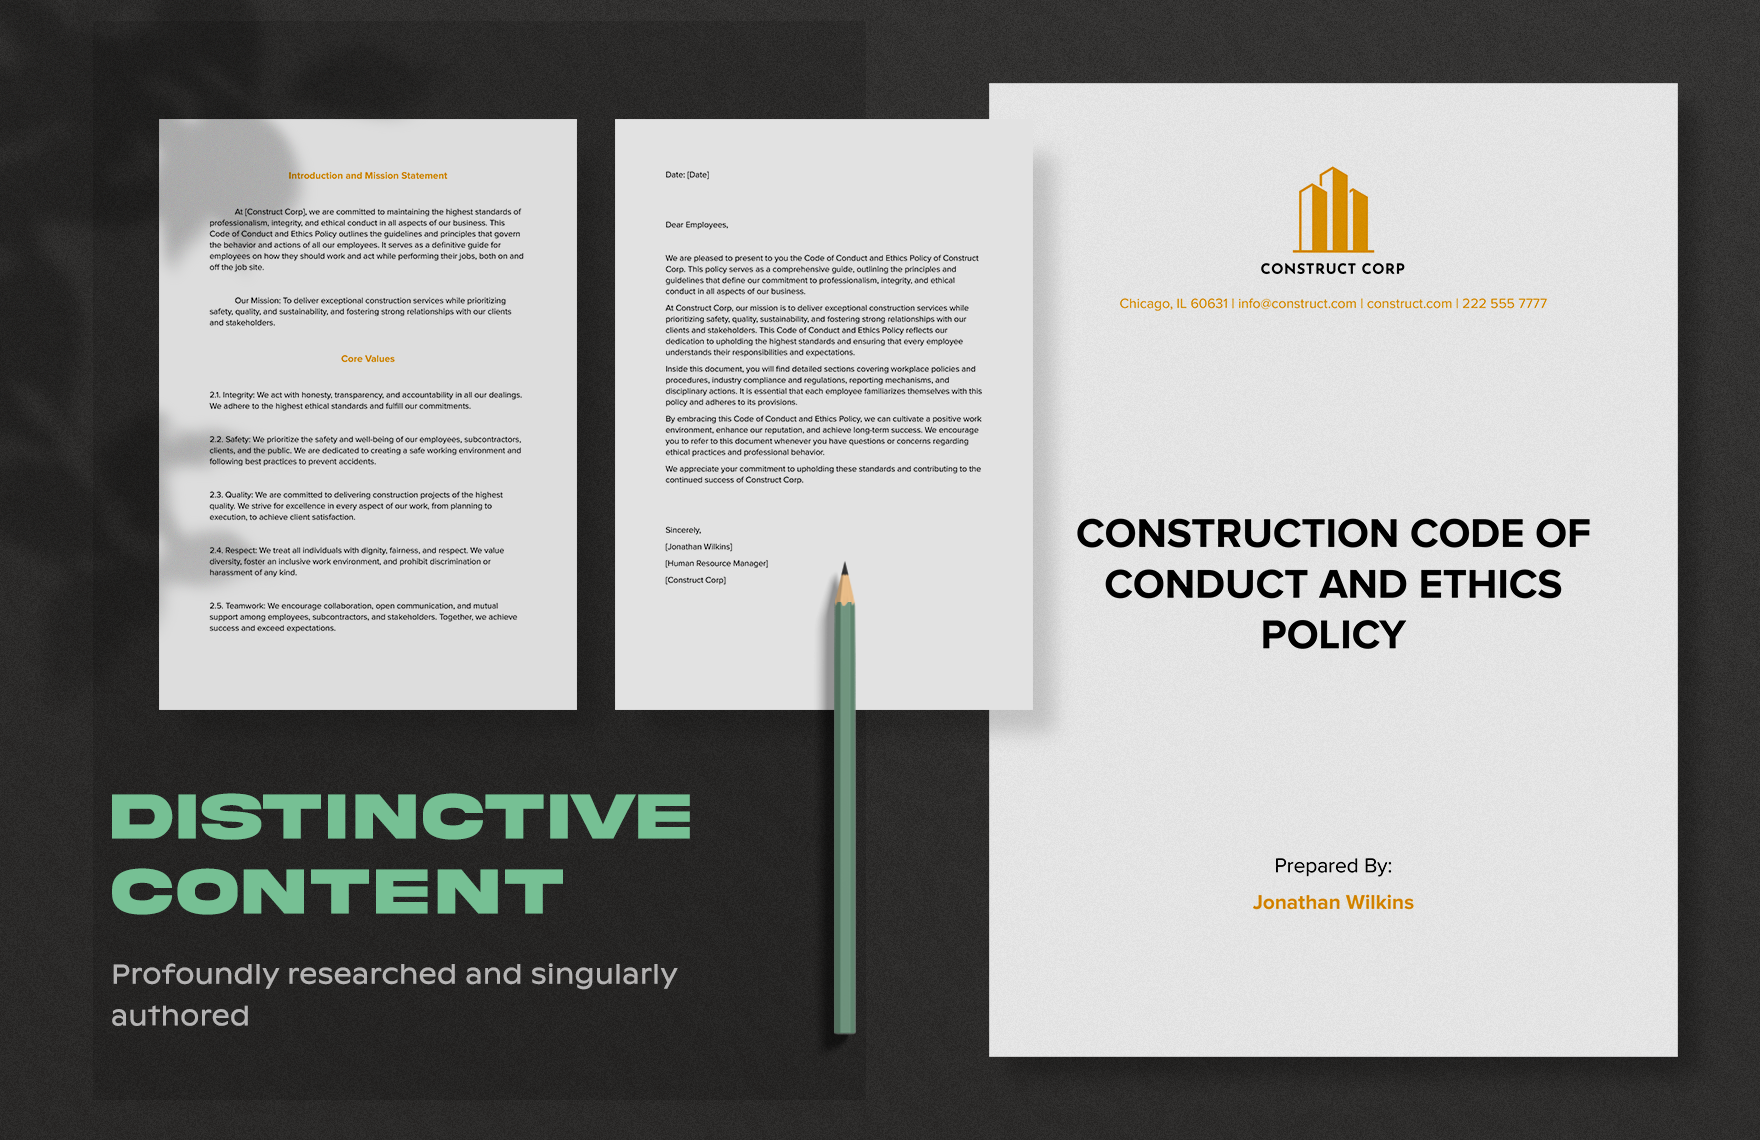 10+ Construction HR Policy Template Bundle